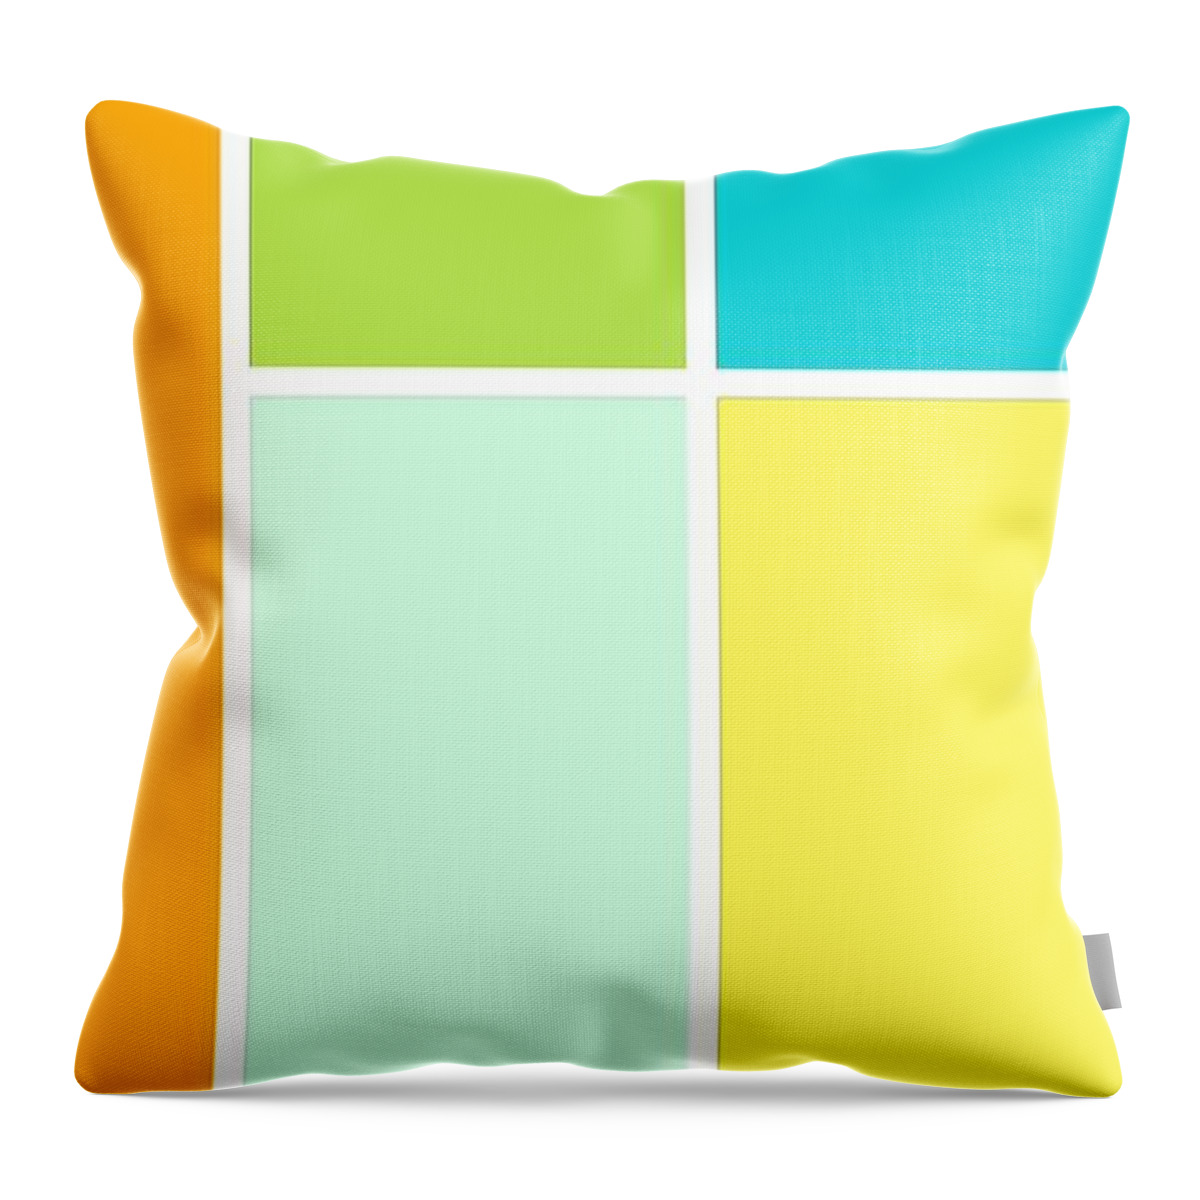 Jesus Throw Pillow featuring the digital art Comfort by Payet Emmanuel